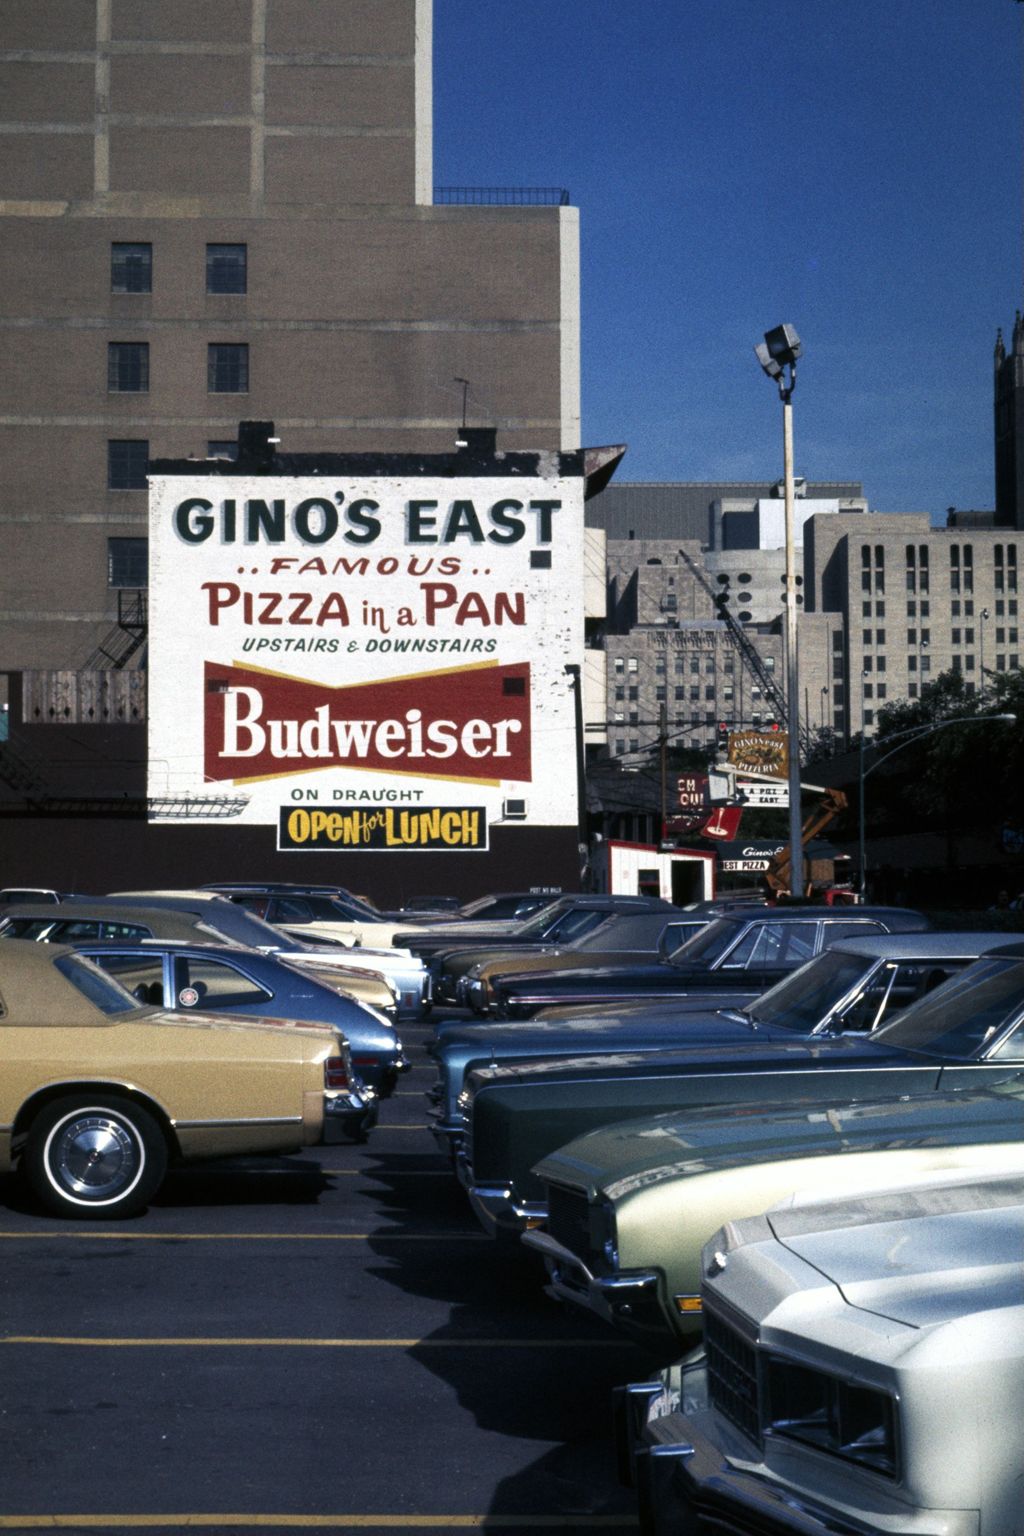 Miniature of Gino's East pizzeria sign and parking lot